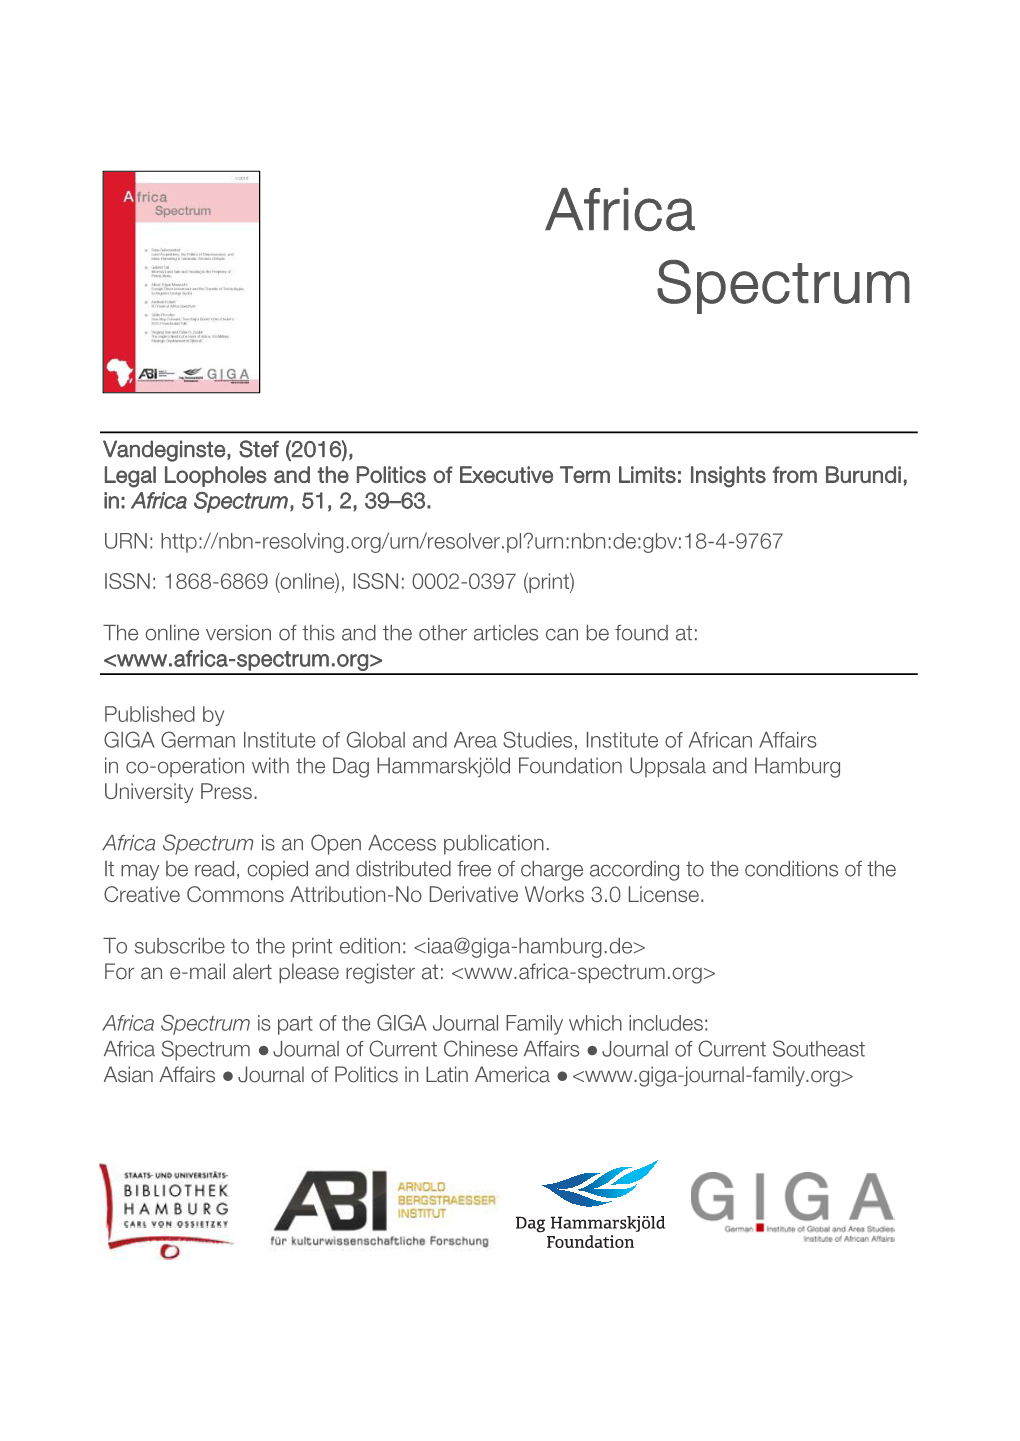 Legal Loopholes and the Politics of Executive Term Limits: Insights from Burundi, In: Africa Spectrum, 51, 2, 39–63